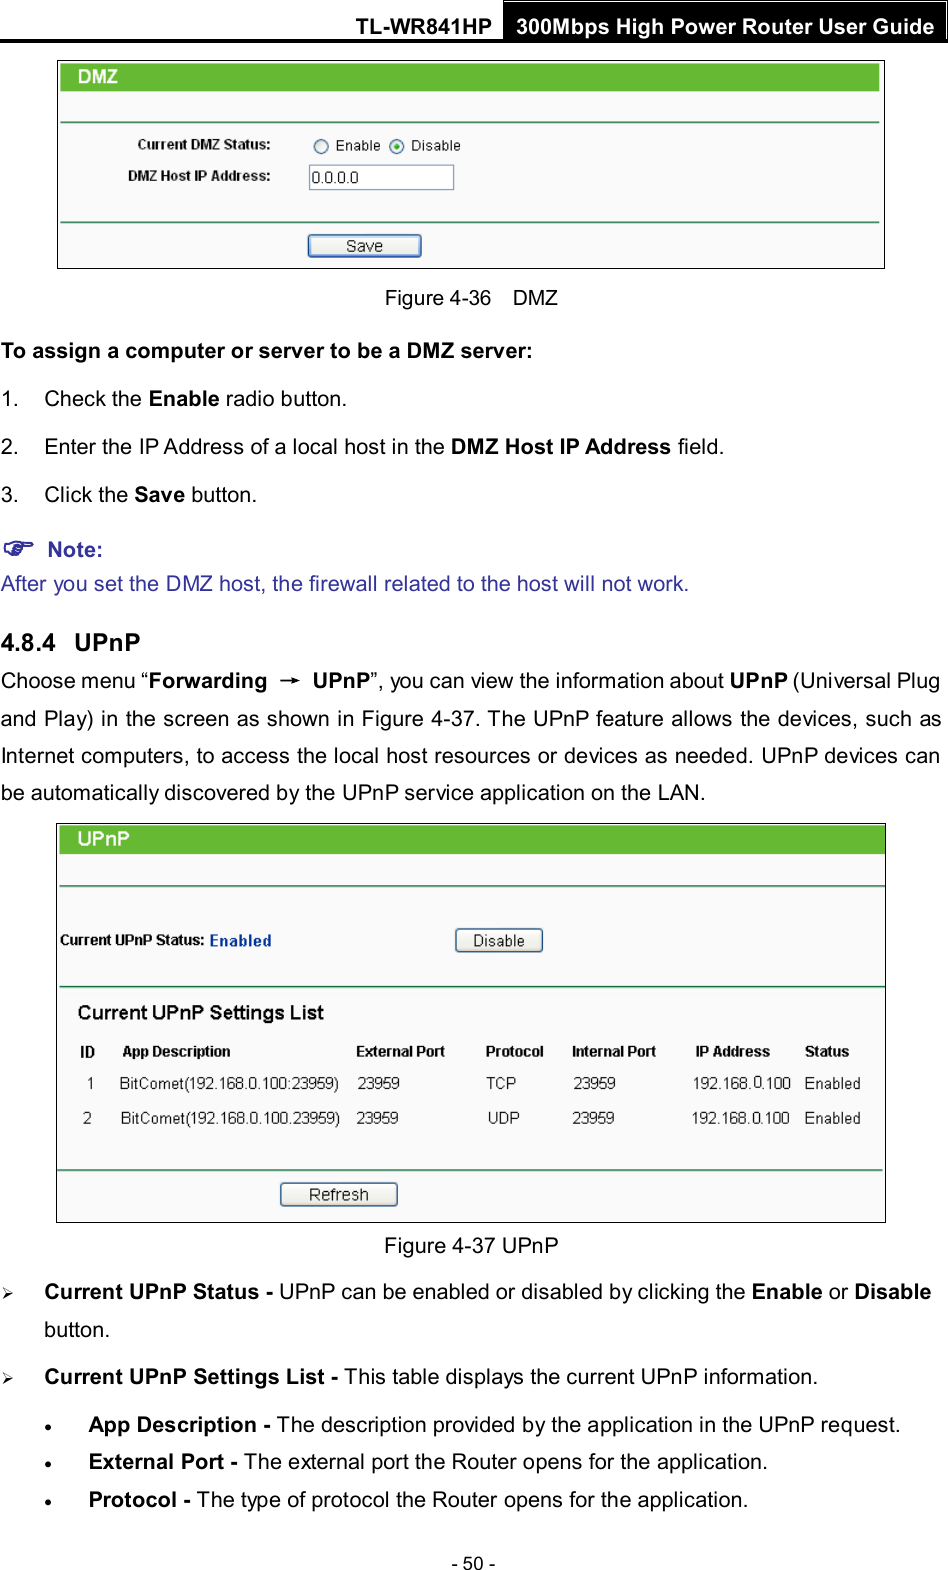 TL-WR841HP 300Mbps High Power Router User Guide  - 50 -  Figure 4-36  DMZ To assign a computer or server to be a DMZ server:   1. Check the Enable radio button. 2. Enter the IP Address of a local host in the DMZ Host IP Address field. 3. Click the Save button.  Note:   After you set the DMZ host, the firewall related to the host will not work. 4.8.4  UPnP Choose menu “Forwarding → UPnP”, you can view the information about UPnP (Universal Plug and Play) in the screen as shown in Figure 4-37. The UPnP feature allows the devices, such as Internet computers, to access the local host resources or devices as needed. UPnP devices can be automatically discovered by the UPnP service application on the LAN.    Figure 4-37 UPnP    Current UPnP Status - UPnP can be enabled or disabled by clicking the Enable or Disable button.    Current UPnP Settings List - This table displays the current UPnP information. • App Description - The description provided by the application in the UPnP request. • External Port - The external port the Router opens for the application. • Protocol - The type of protocol the Router opens for the application. 